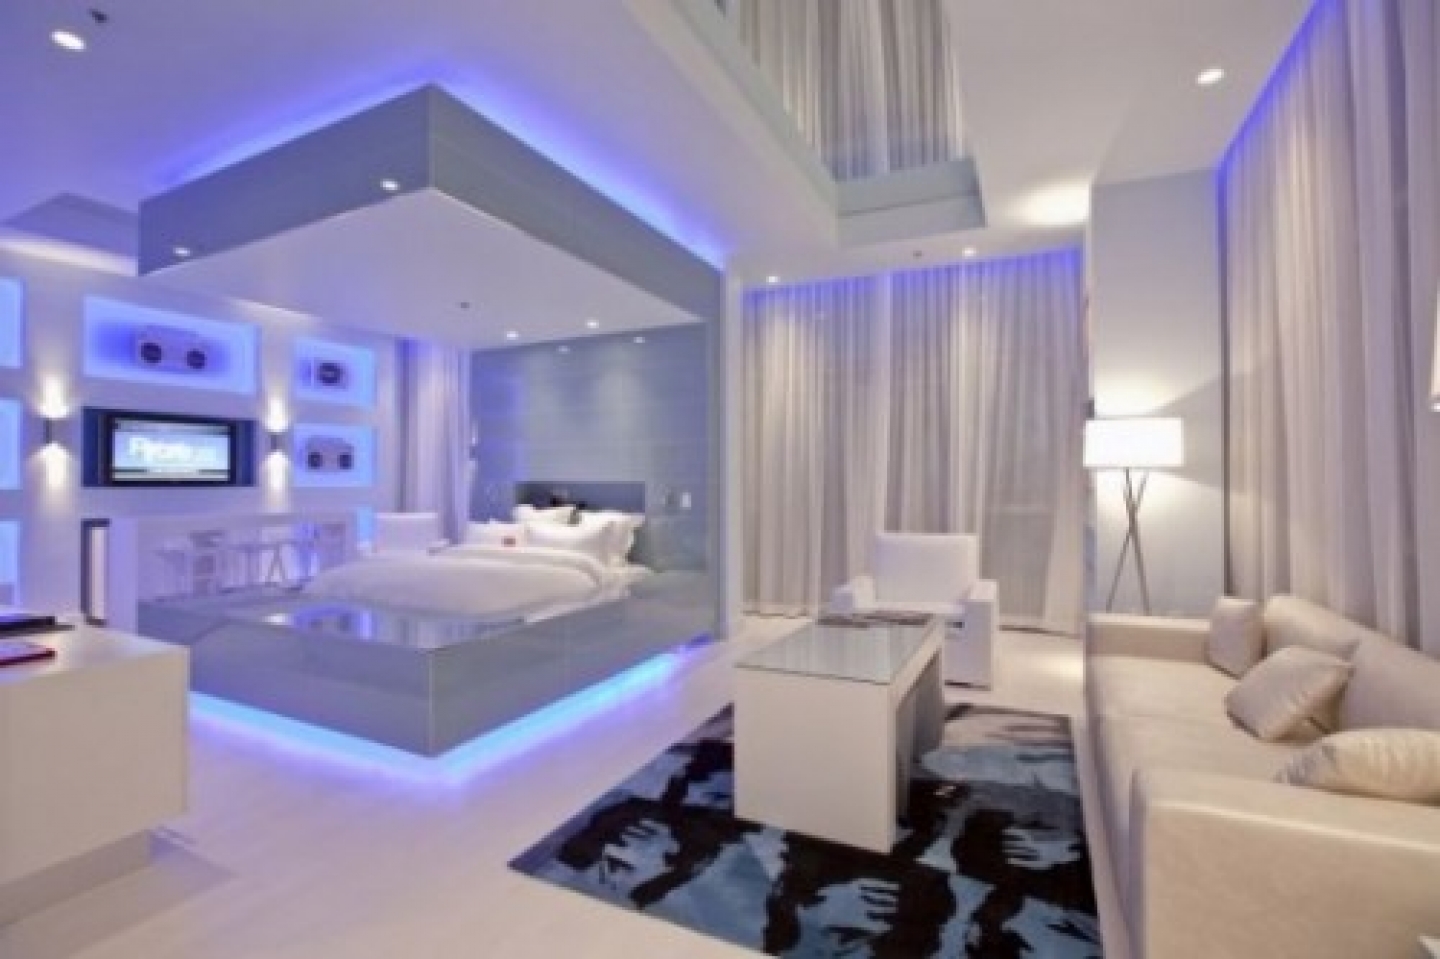 bedroom designs modern cool bed bedrooms wow rooms decor idea awesome contemporary most decorating unique beds architecture apartment really latest